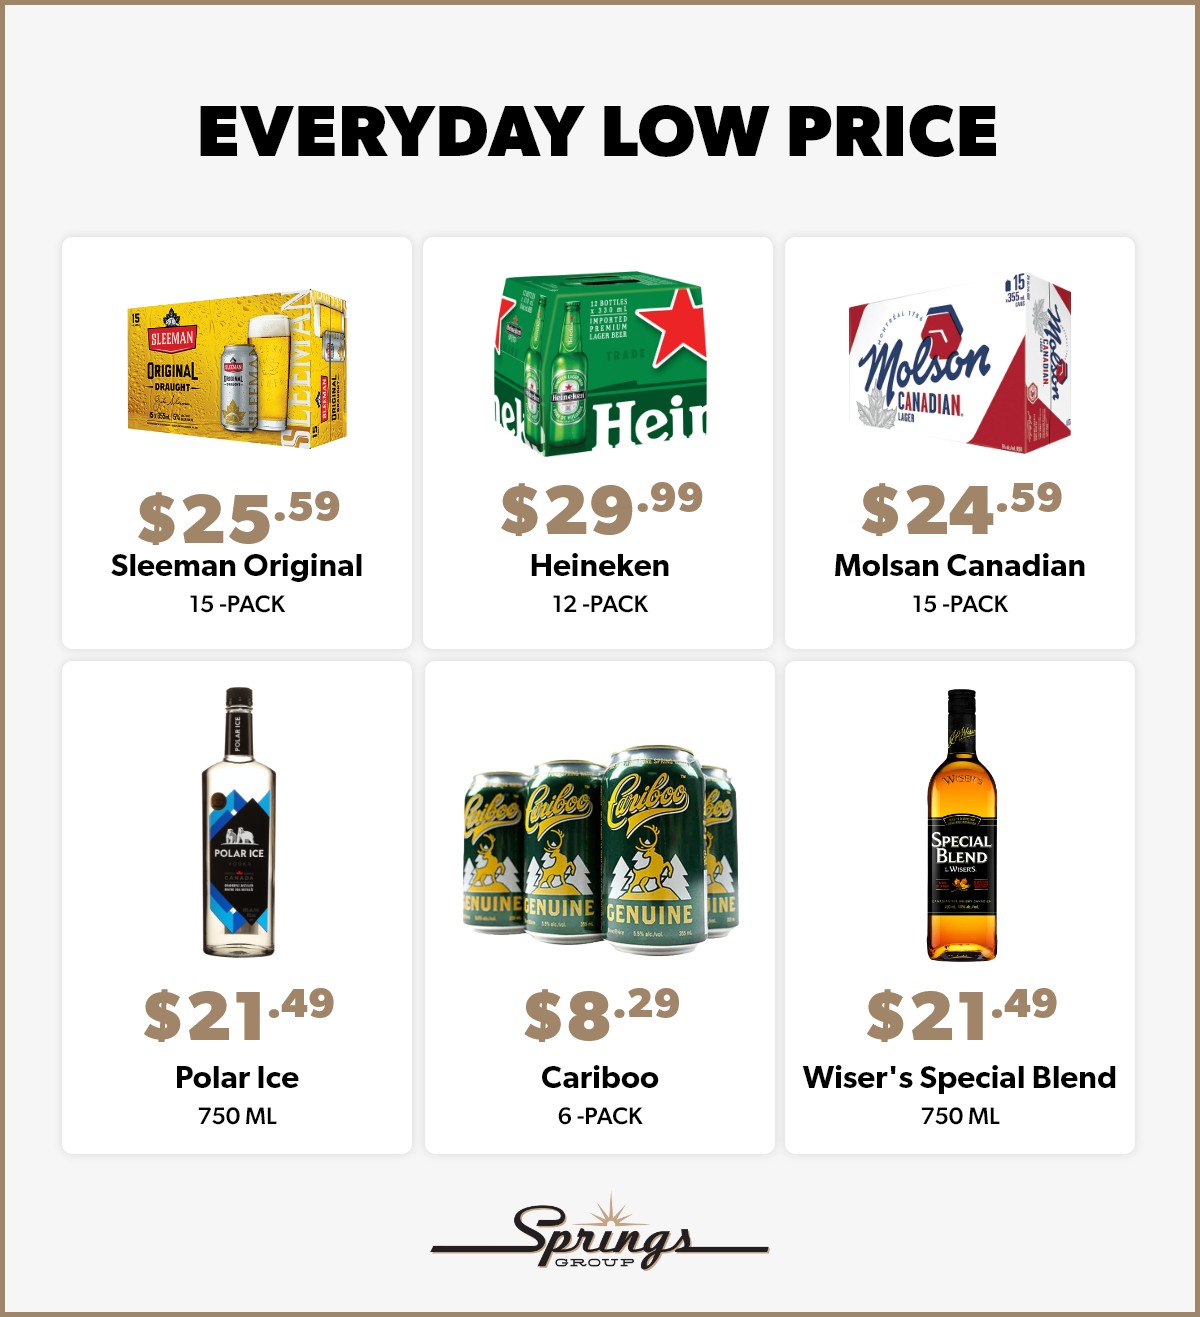 Every Day Low Prices at Springs Liquor Stores